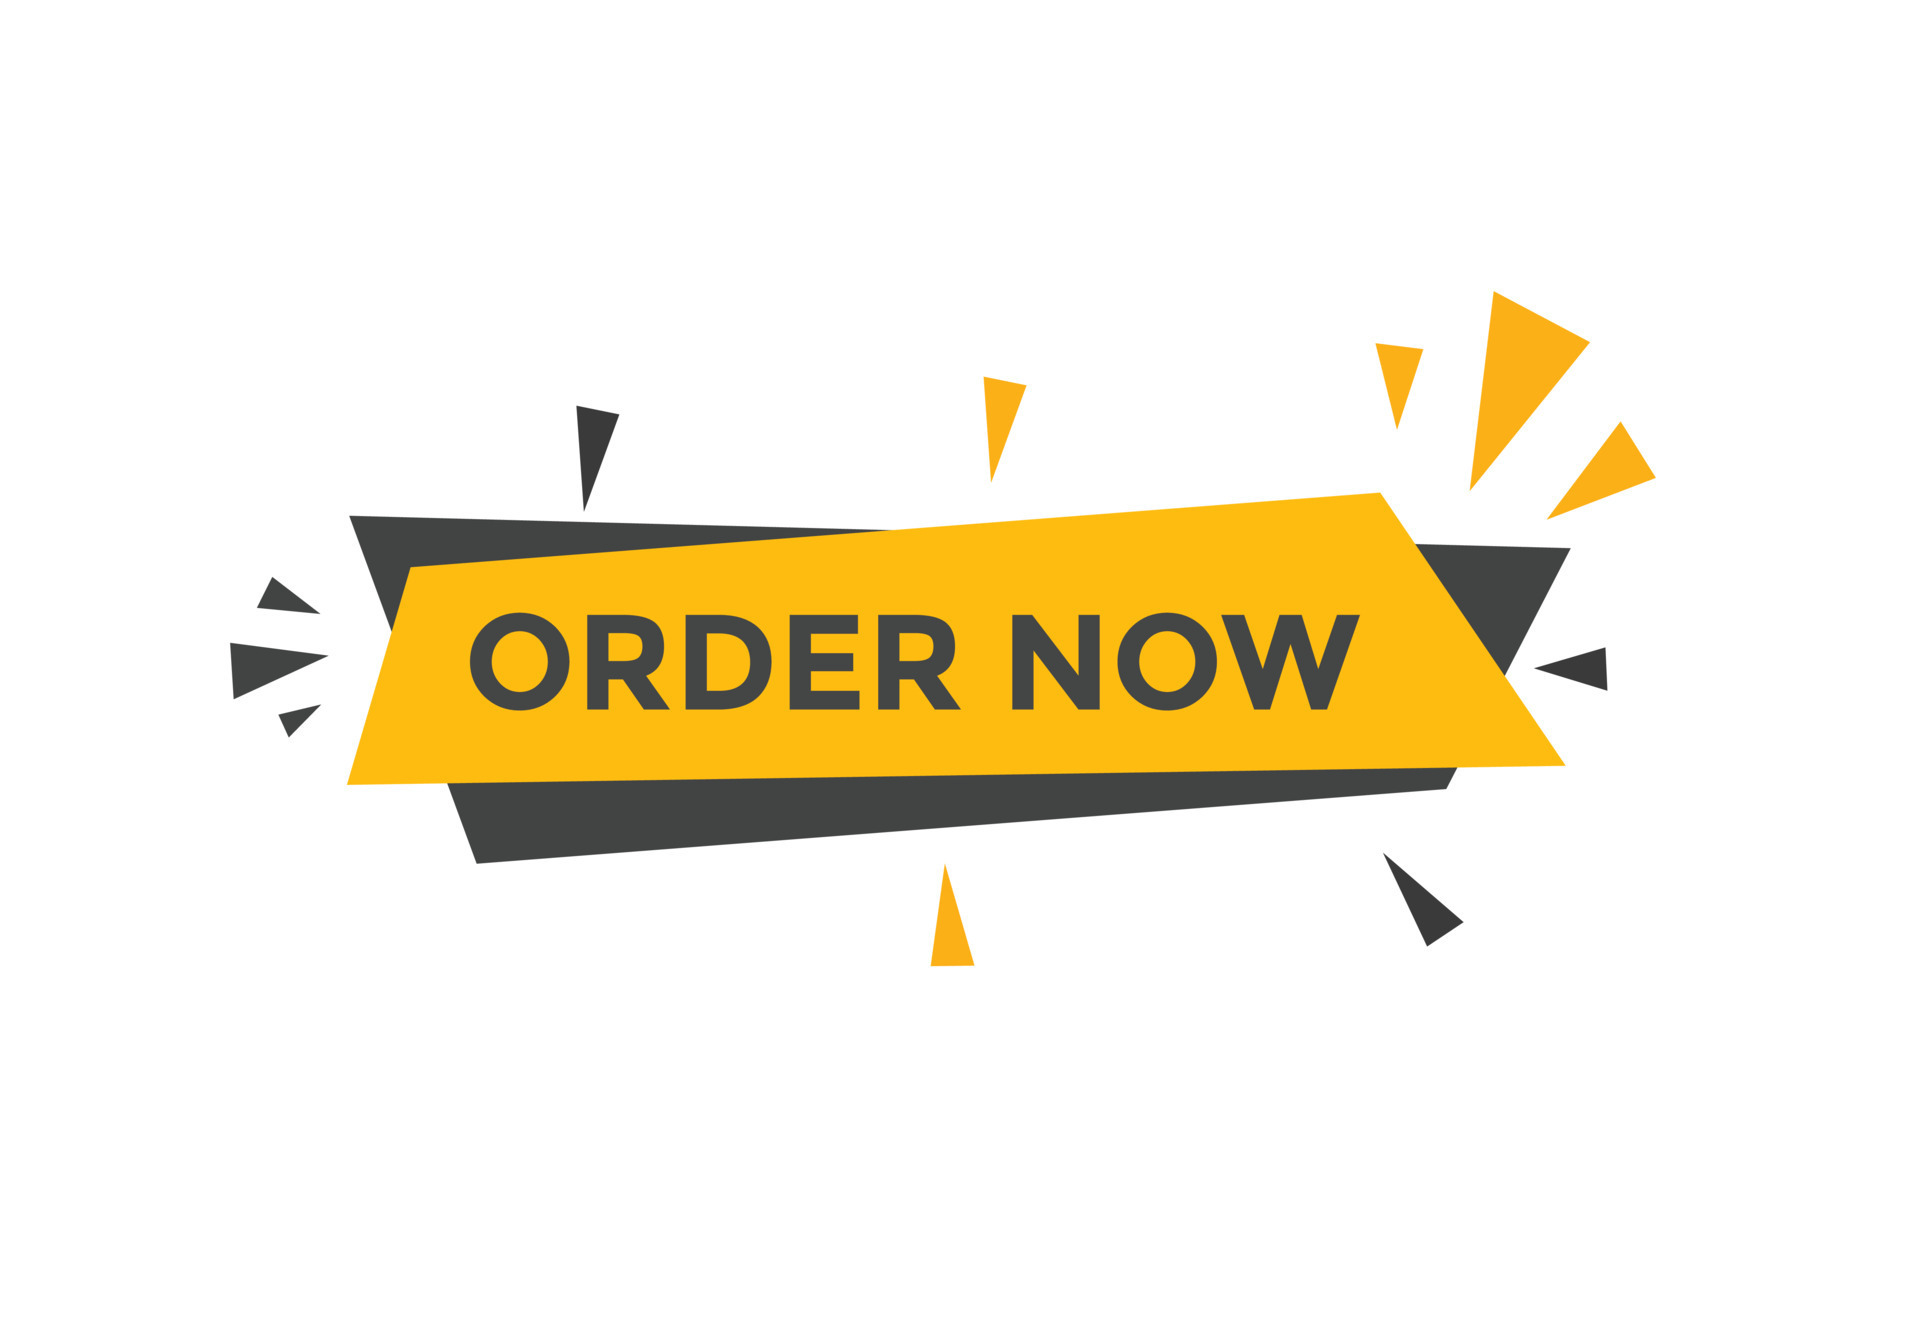 order-now-button-order-now-text-web-banner-template-sign-icon-banner-vector.jpg